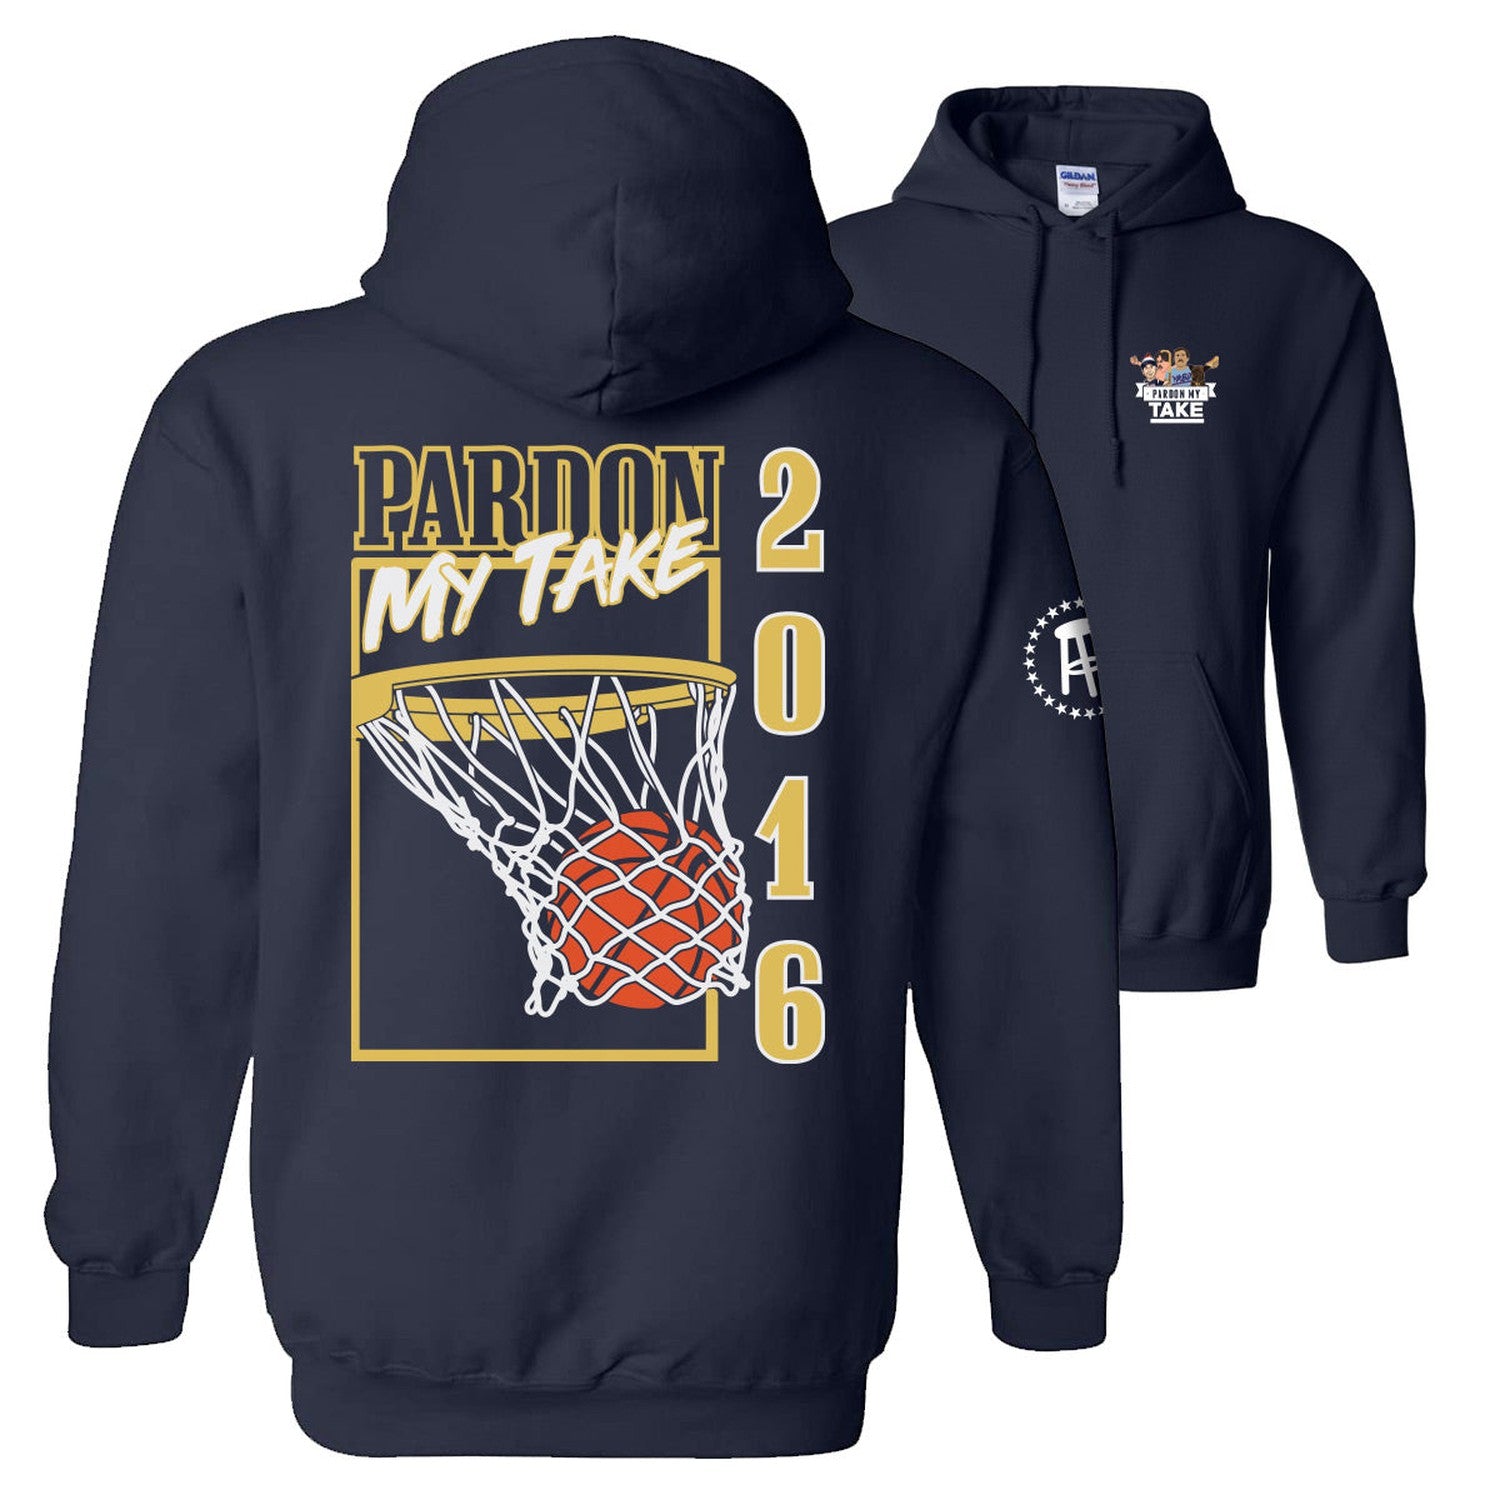 The Barstool Sports Store | Official Merchandise‎